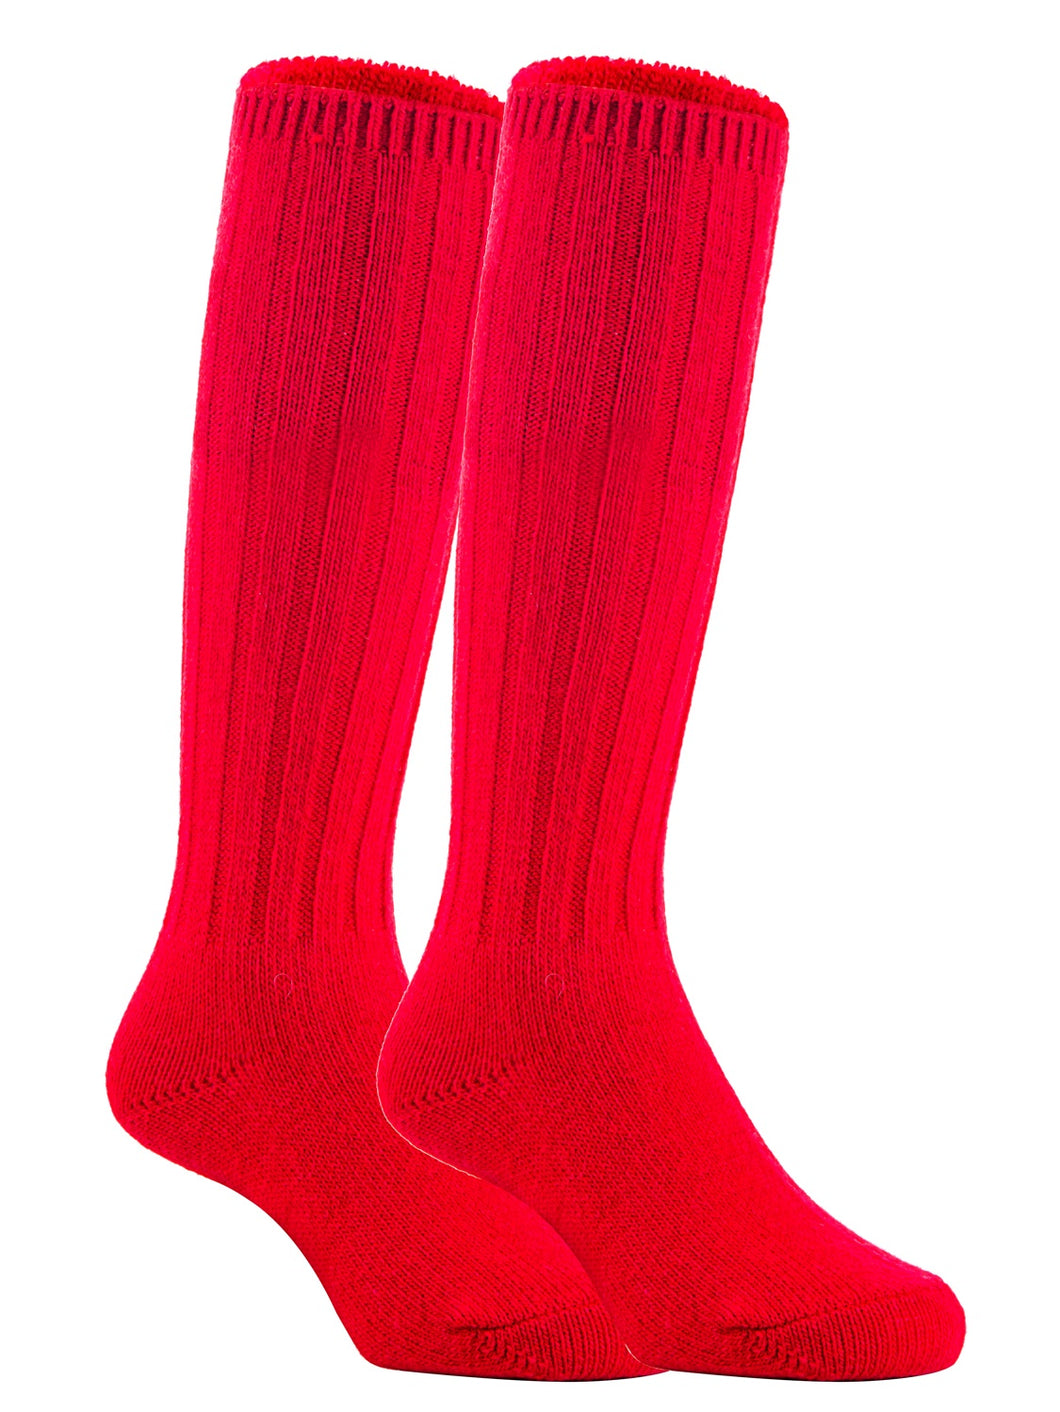 Lian Style Unisex Baby Children 4 Pairs Knee-high Wool Boot Blend Boot Socks Size 0-2Y(Red)